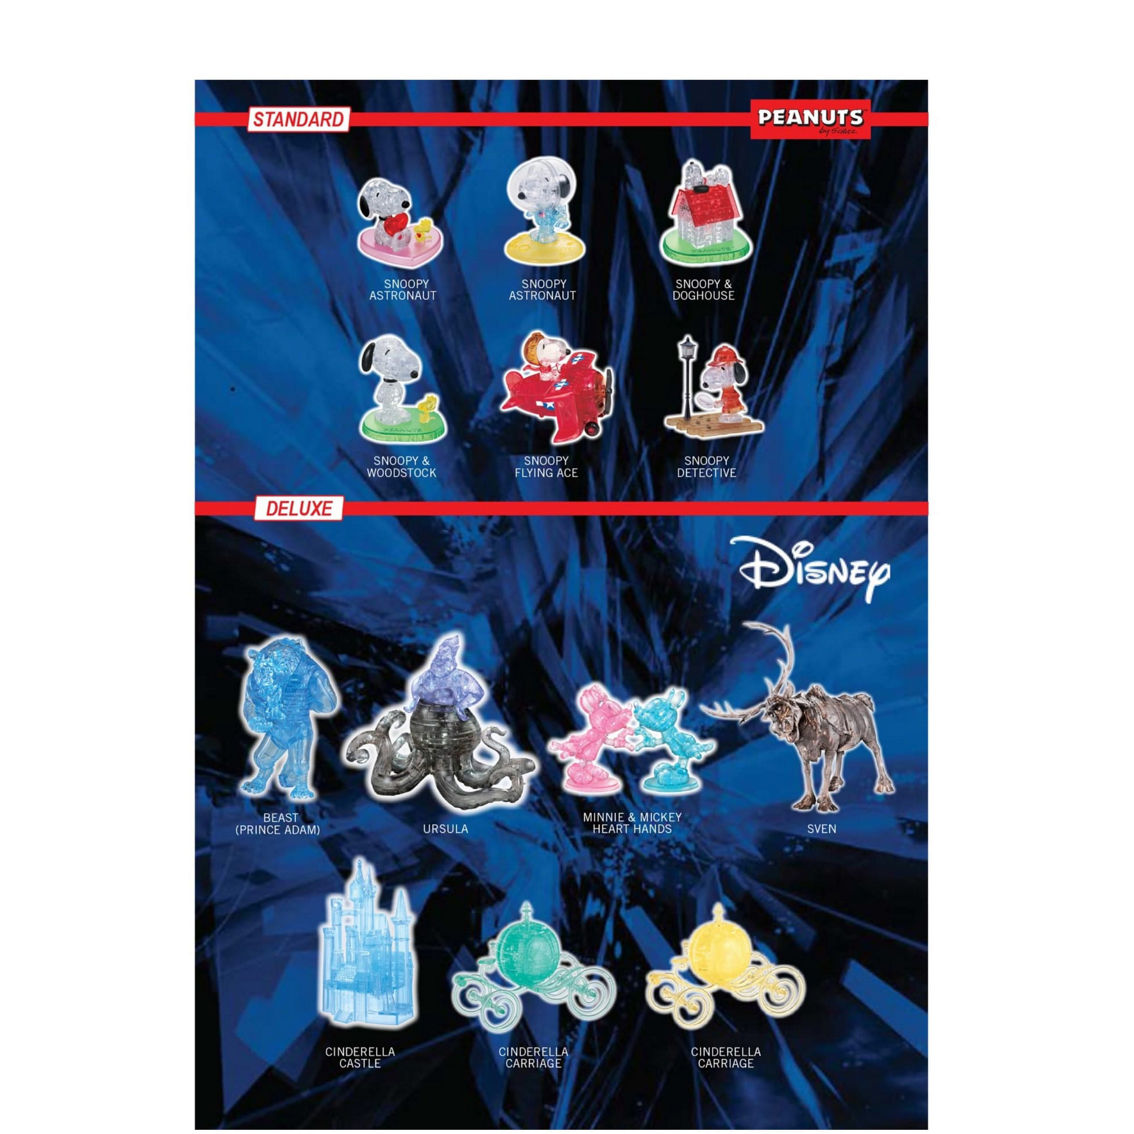 BePuzzled 3D Crystal Puzzle - Disney Mickey Mouse (Multi-Color): 36 Pcs - Image 4 of 5